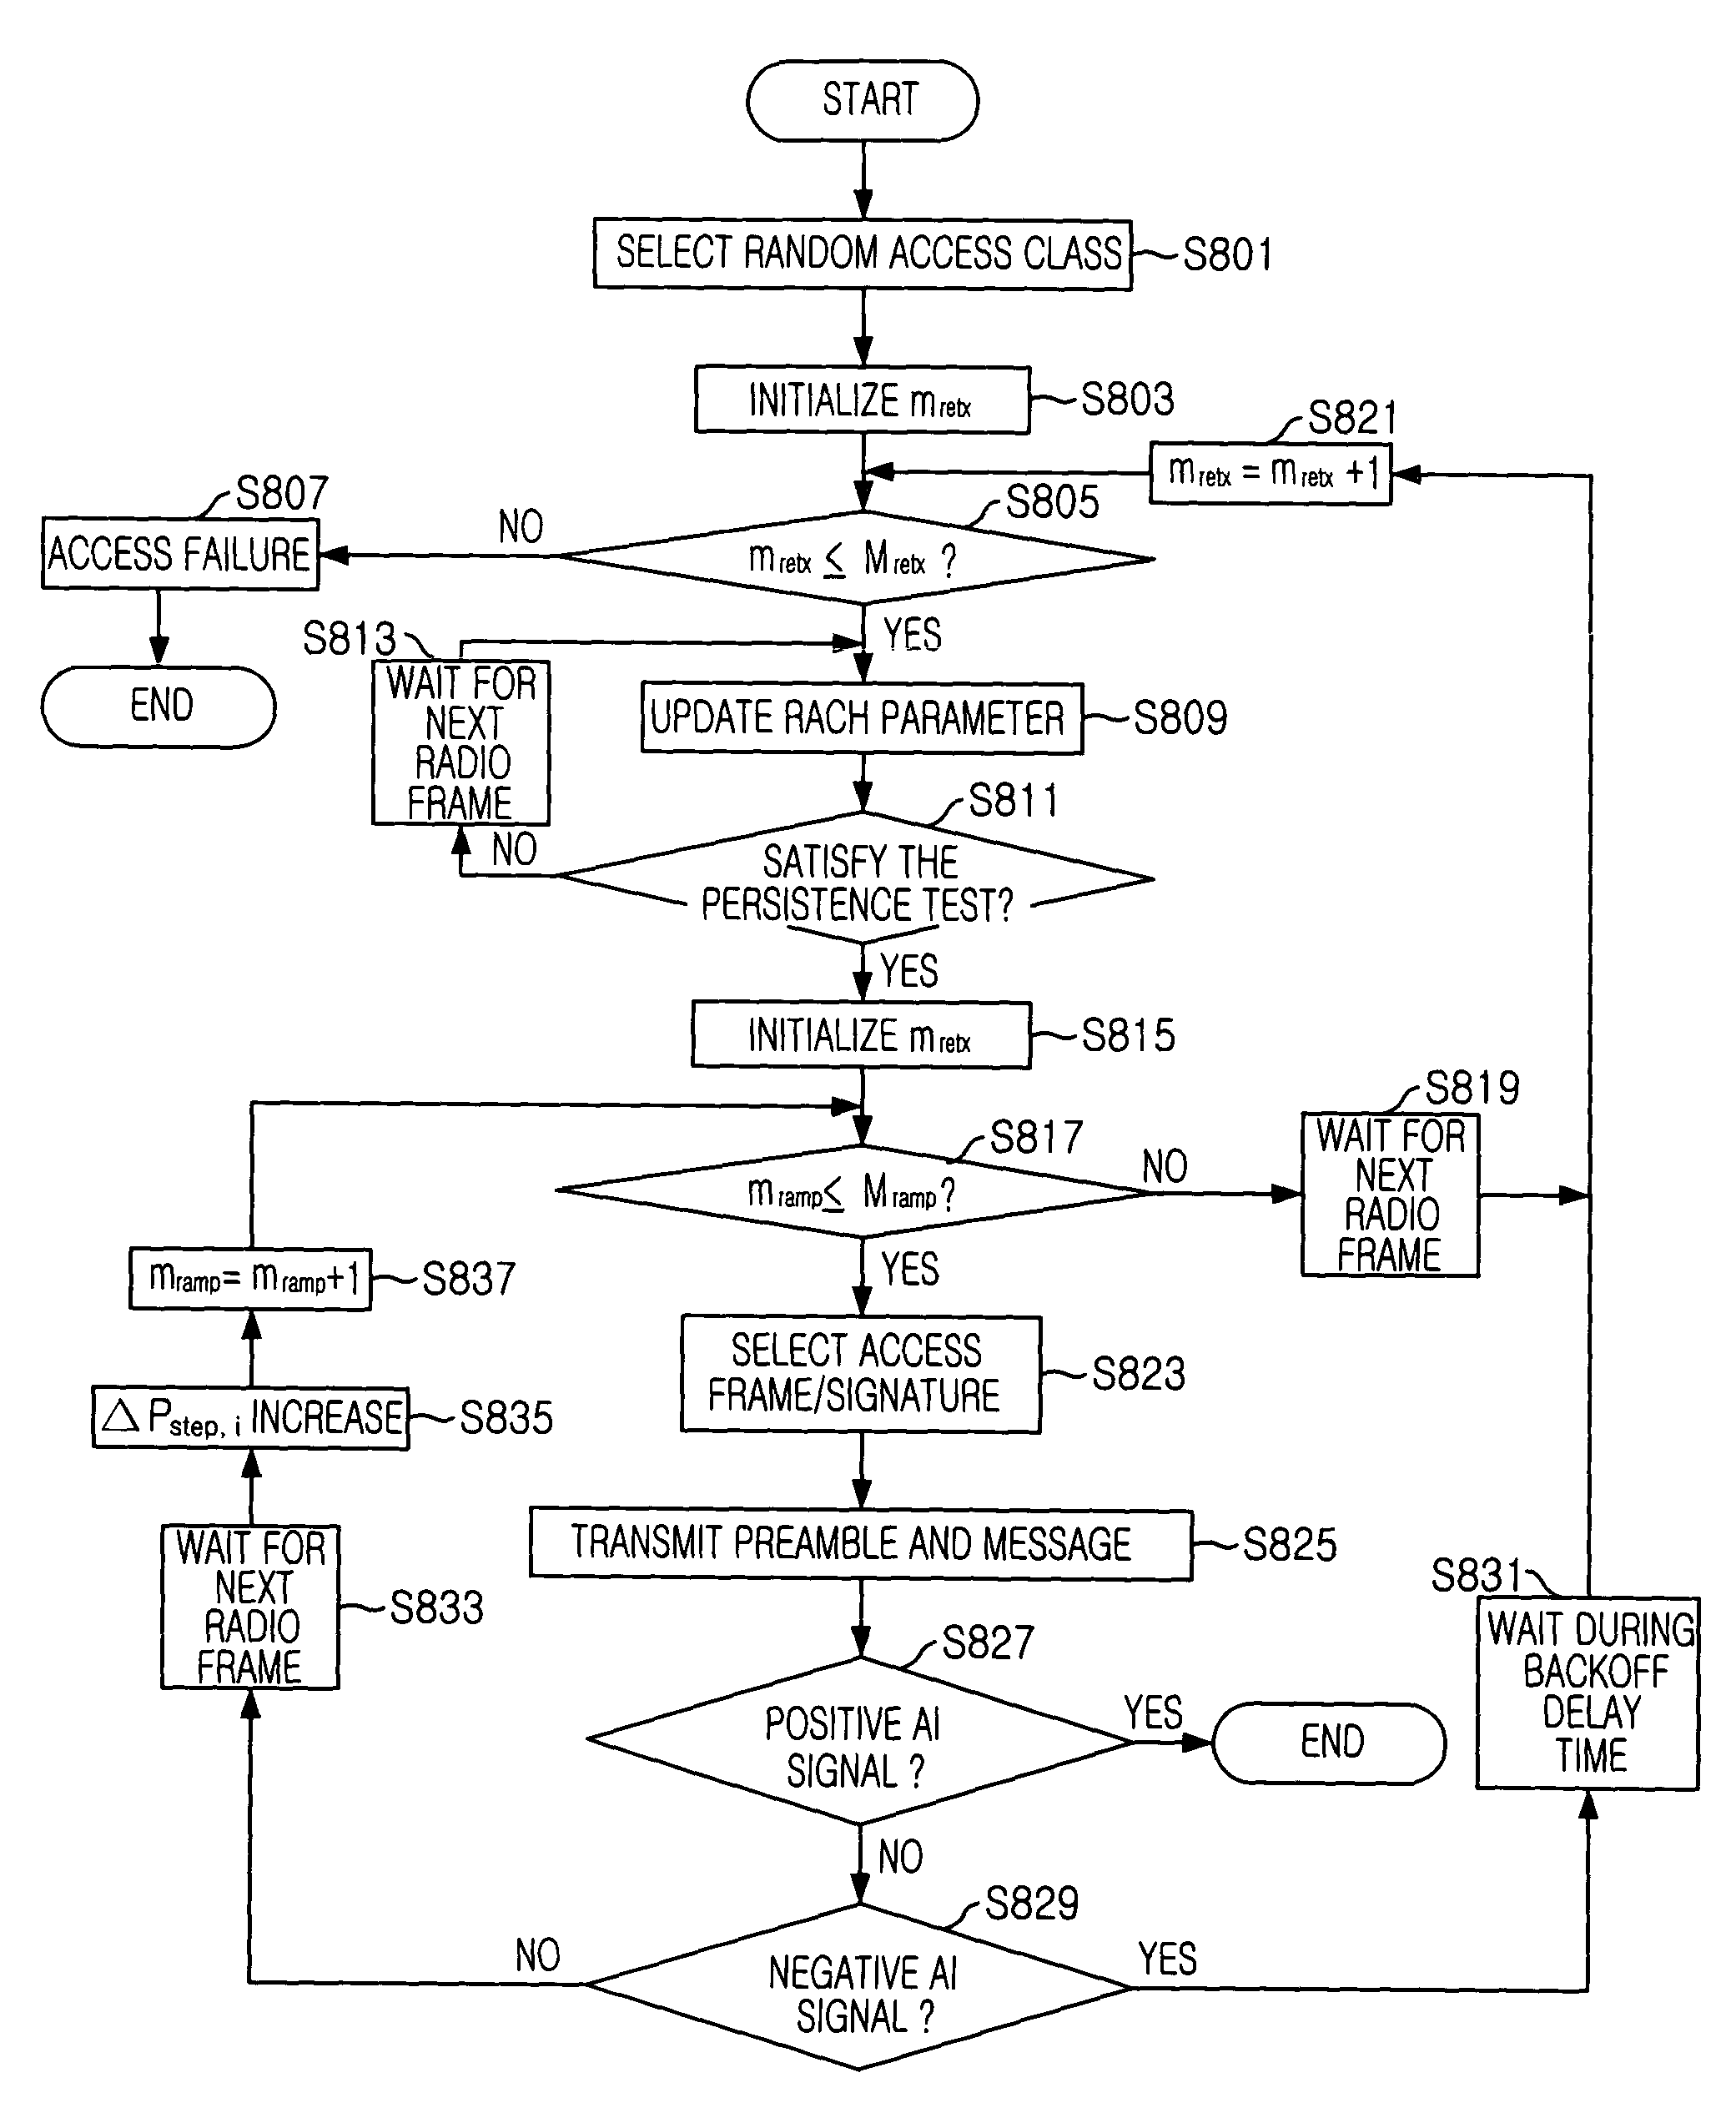 Random access channel access apparatus for mobile satellite communication system and method therefor